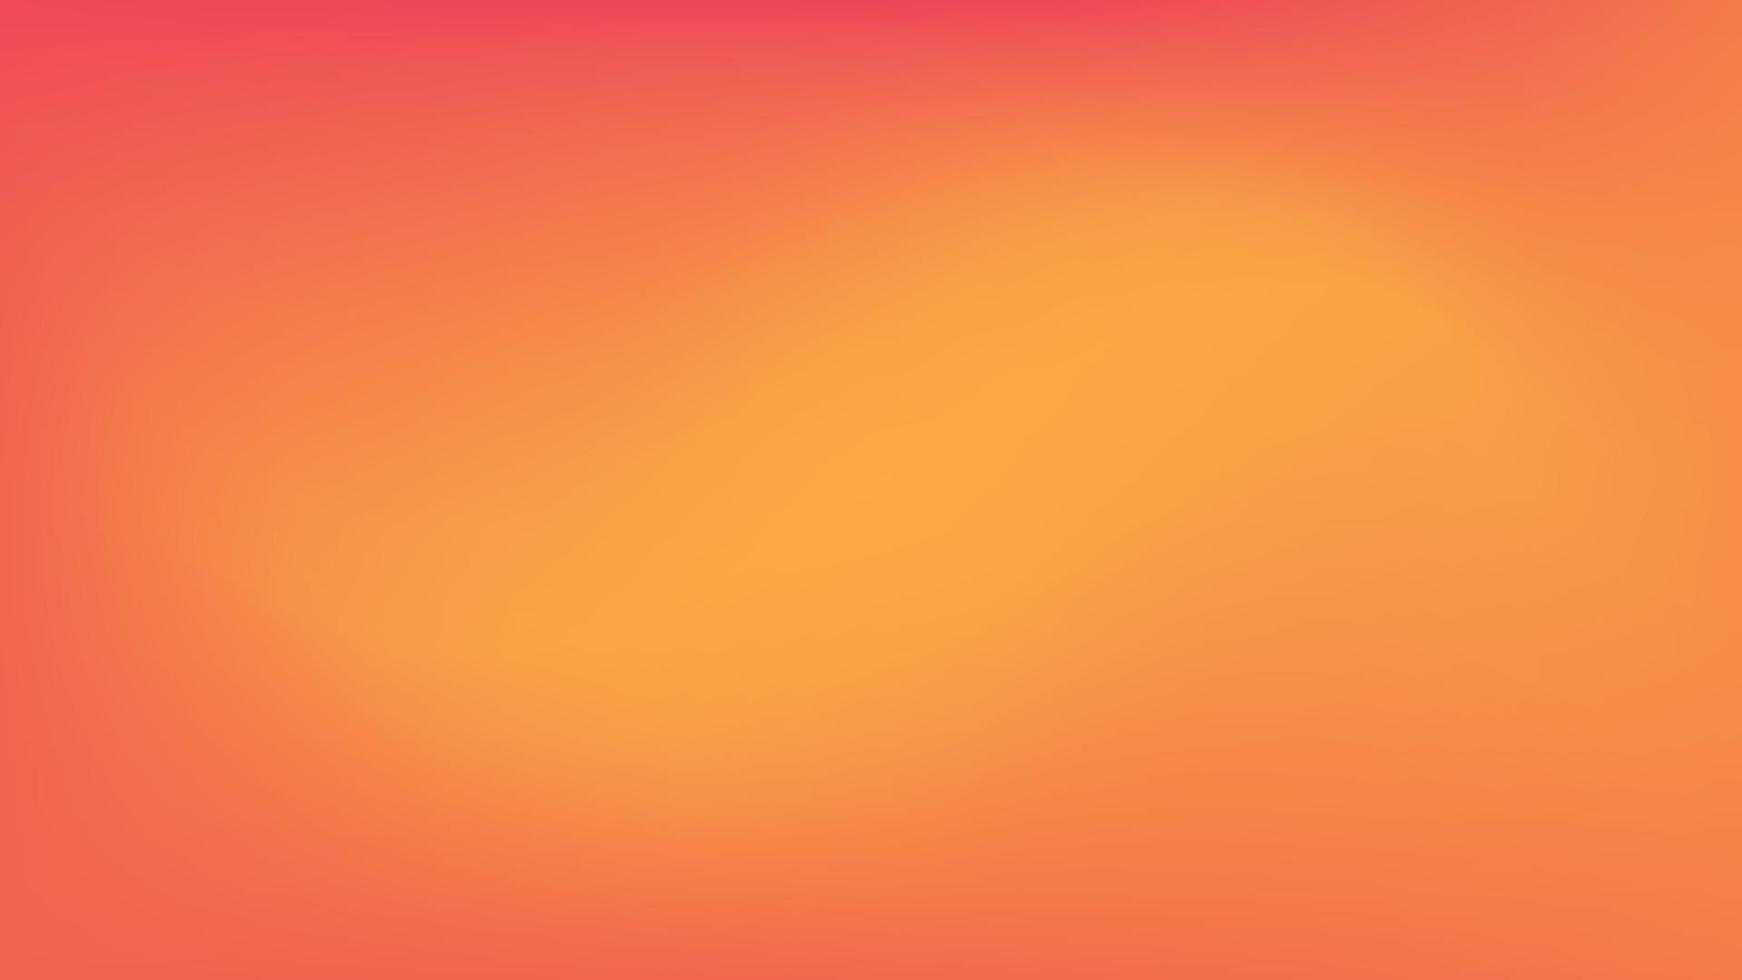 Gradient abstract background. Smooth soft and warm bright tender liquid red, yellow, orange gradient for app, web design, web pages, banners, greeting cards. Vector illustration design